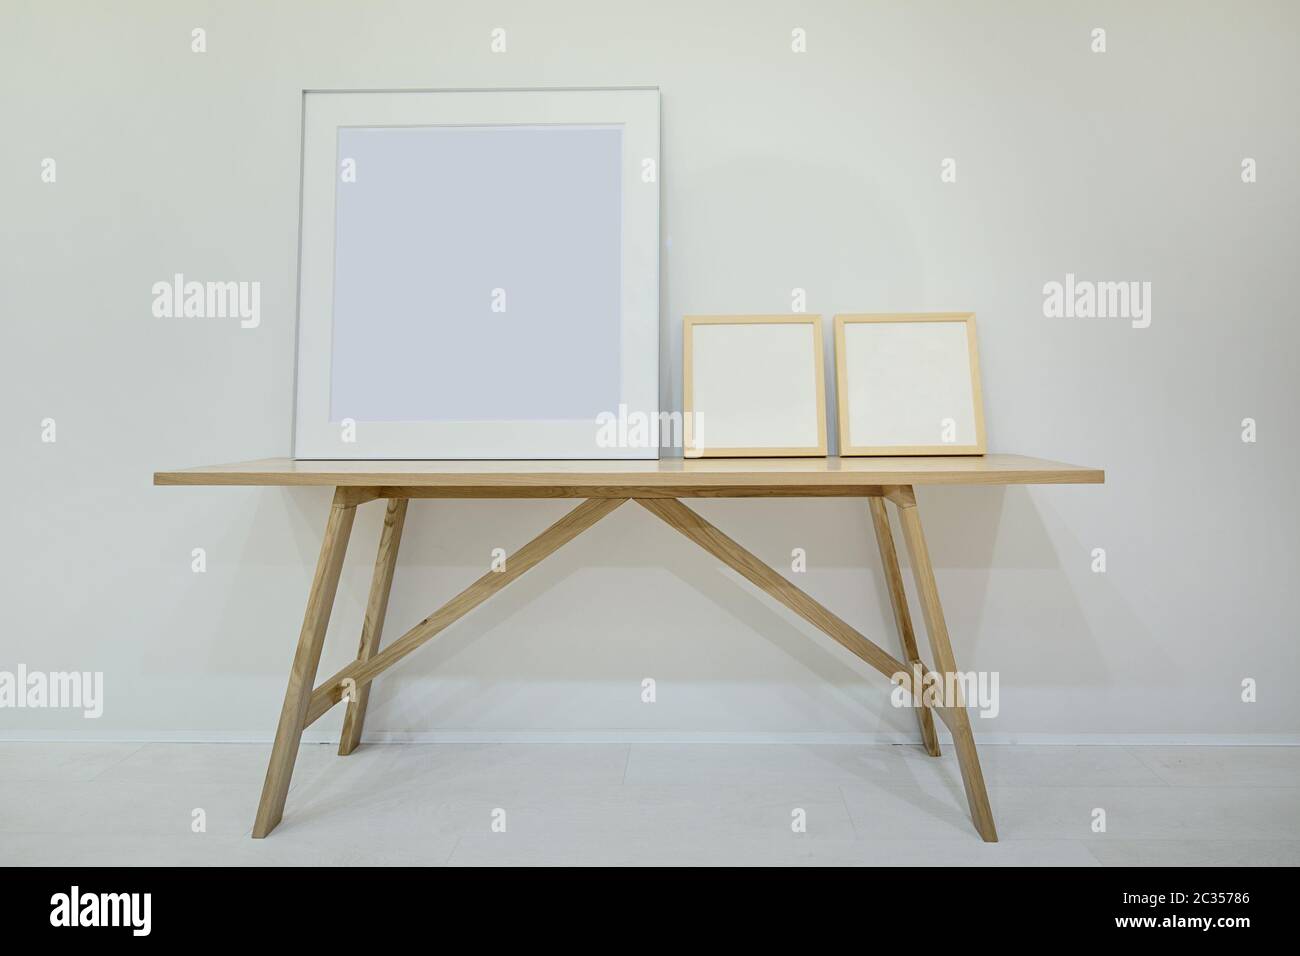 Three empty decorative frame for paintings or photographs on the Stock Photo